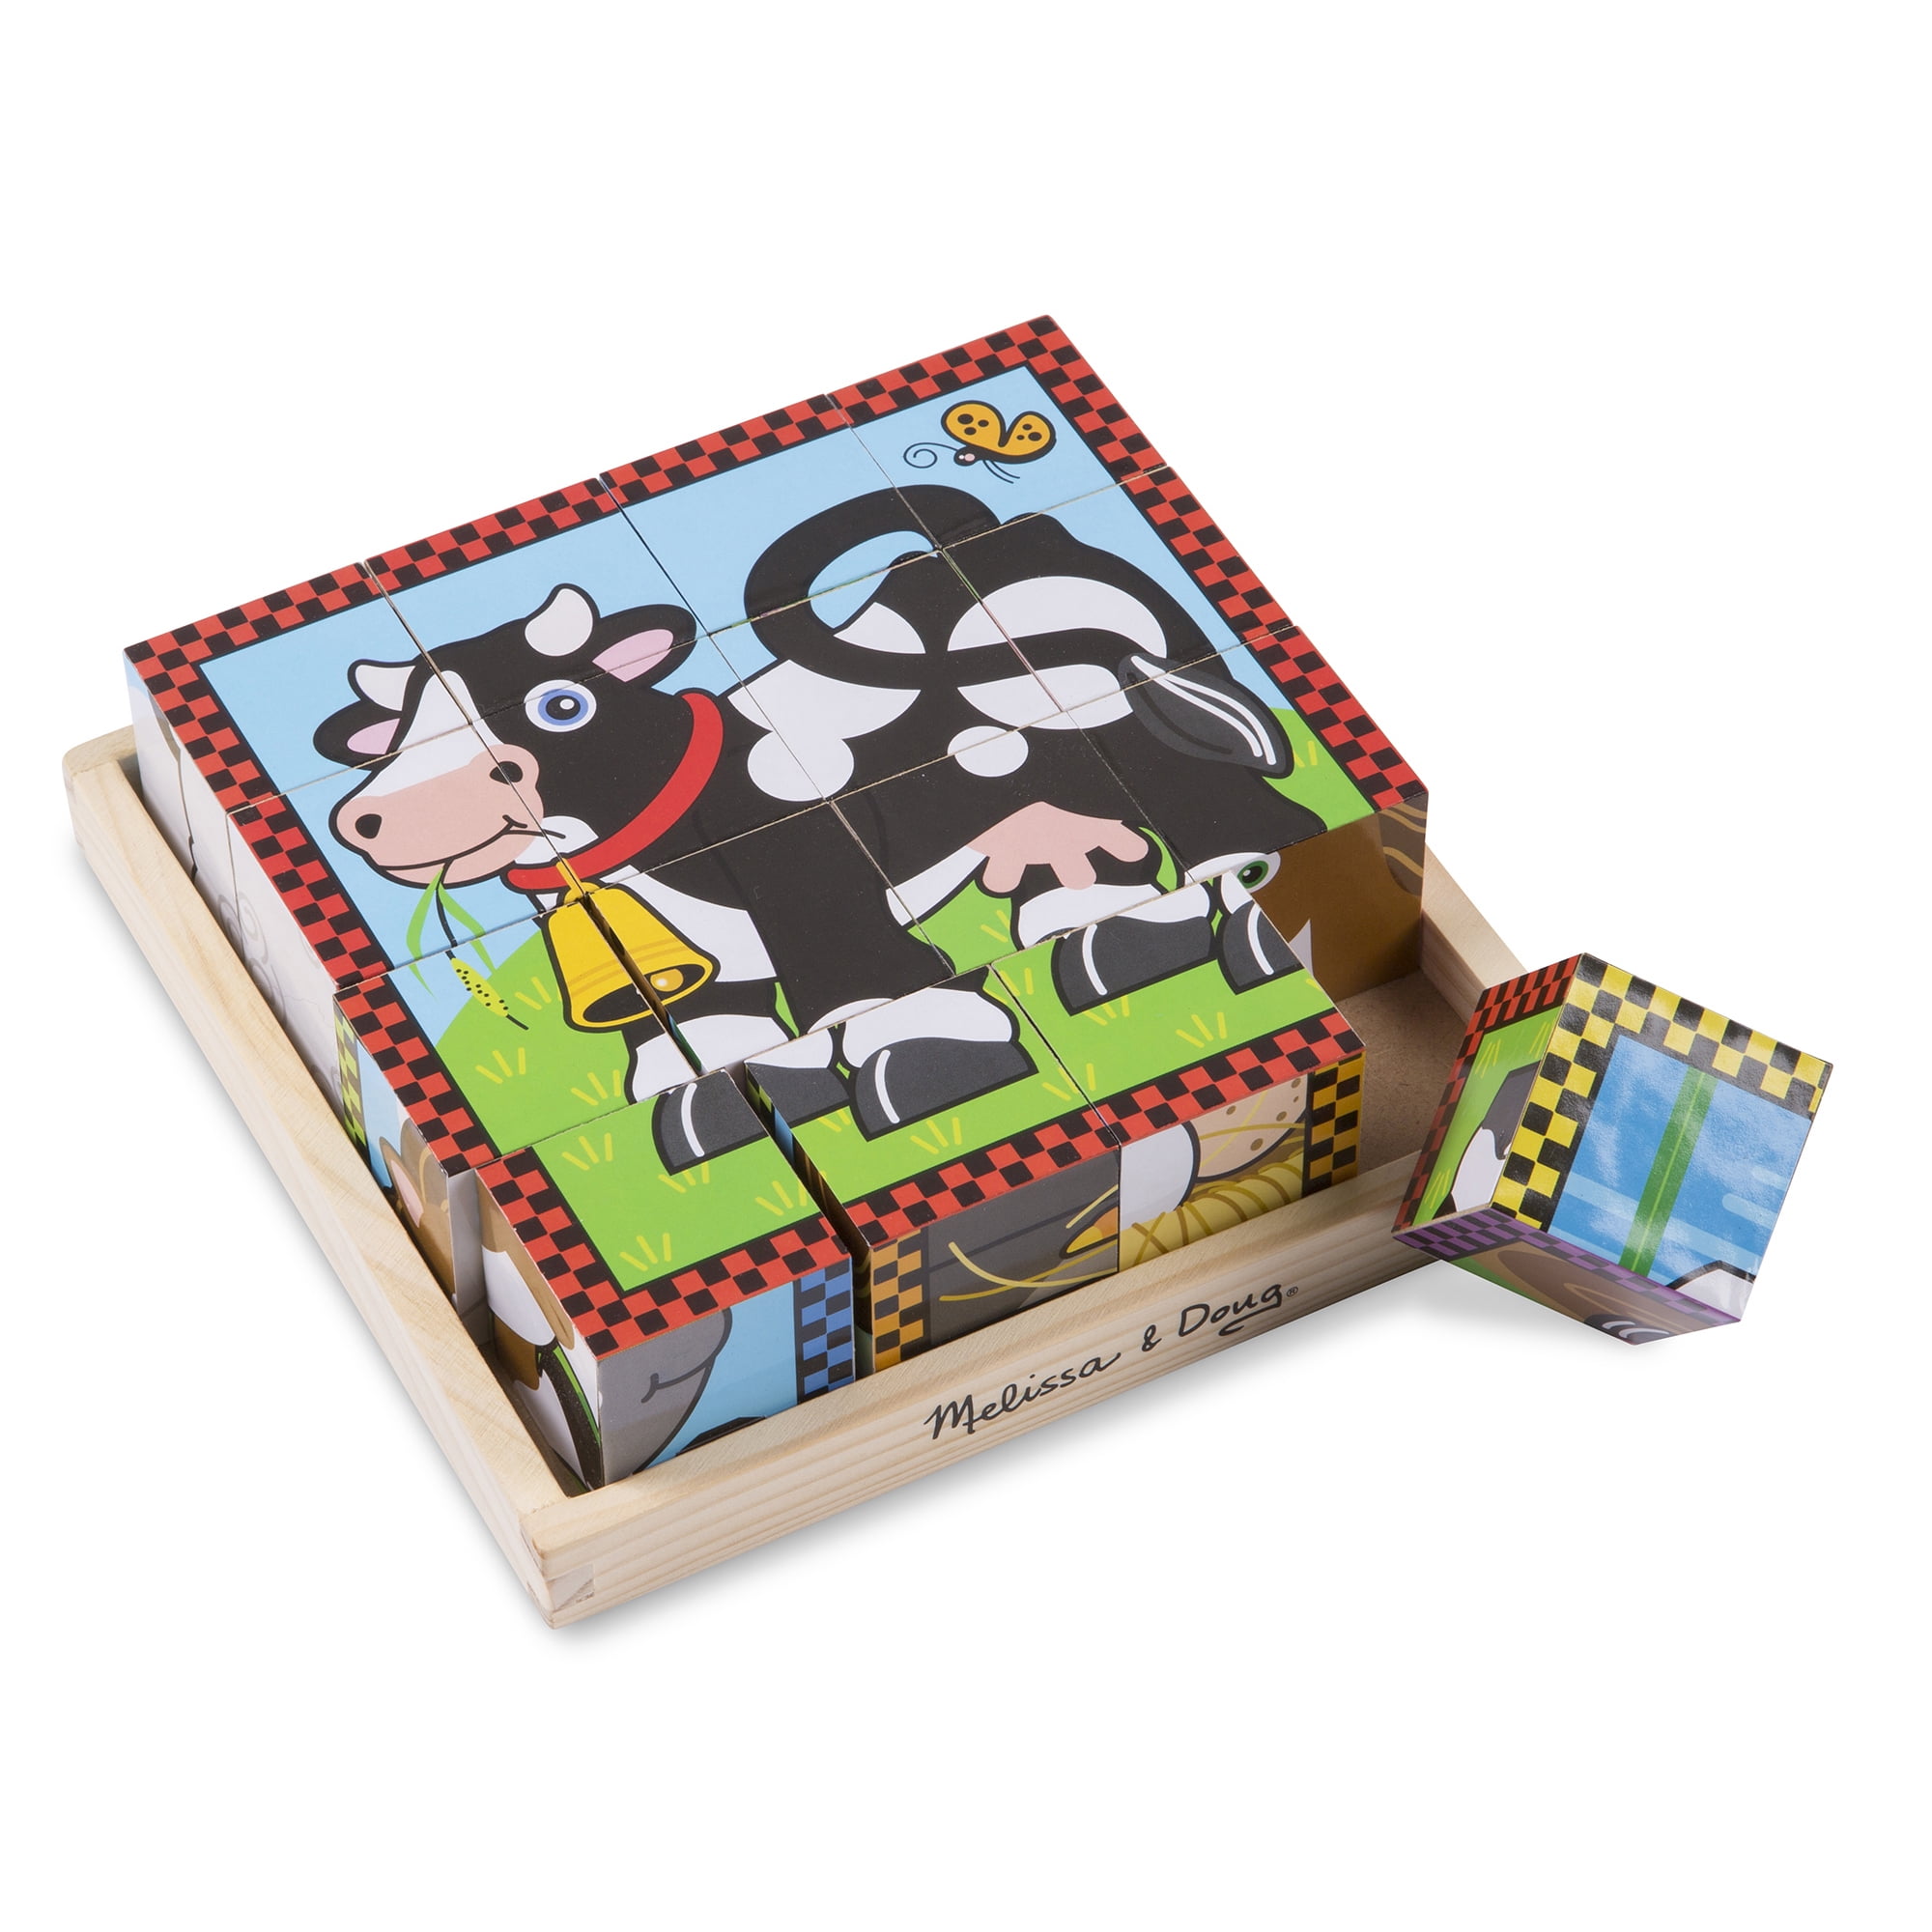 Melissa & Doug Farm Wooden Cube Puzzle With Storage Tray - 6 Puzzles in 1 (16 pcs) | FSC-Certified Materials